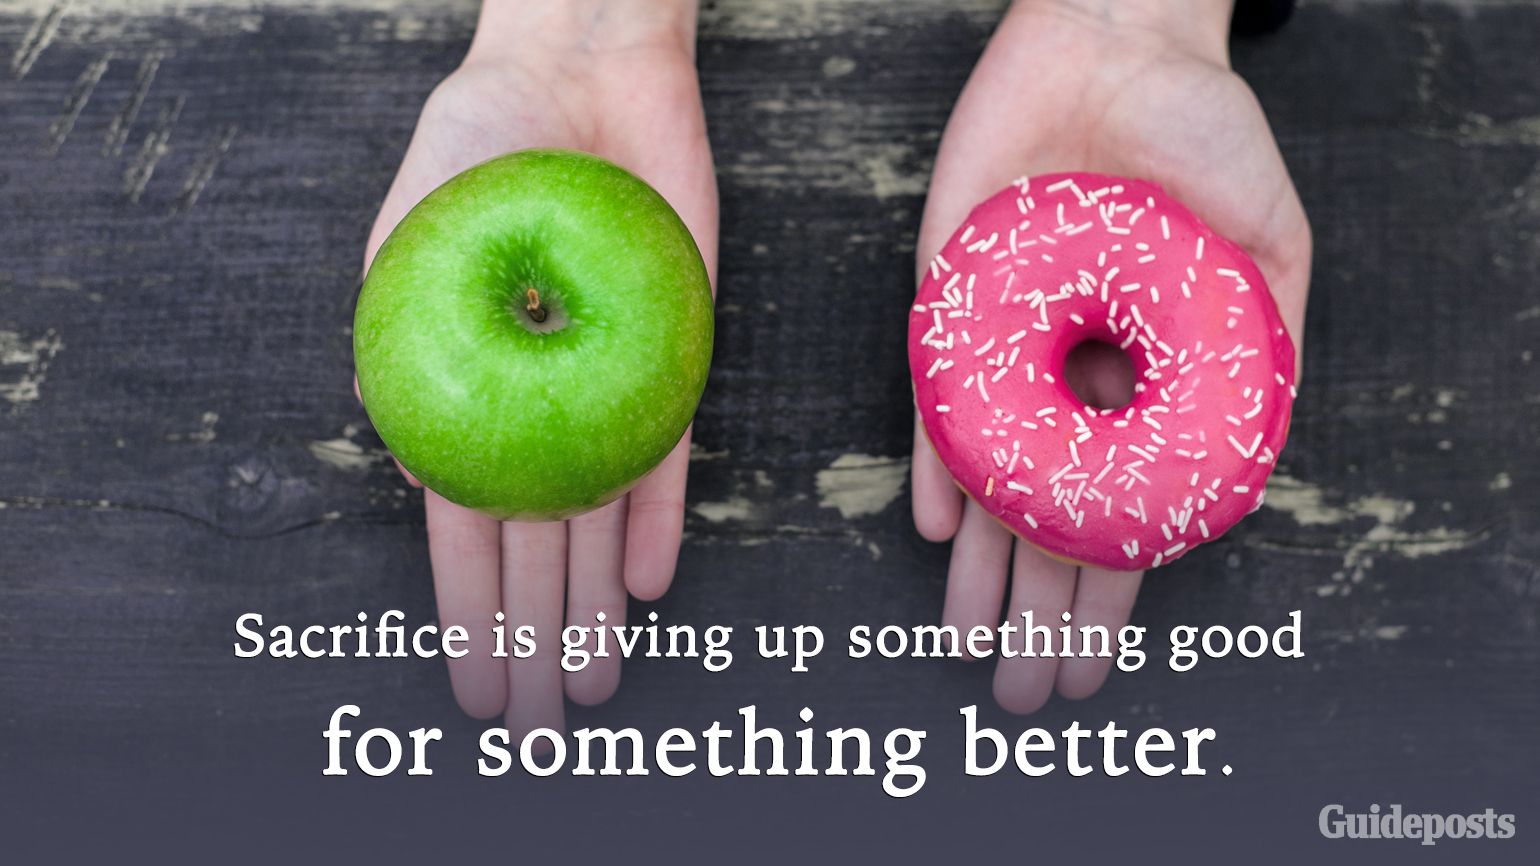 Motivational Quotes for Weight Loss: Sacrifice is giving up something good for something better. better living health and wellness living longer living better